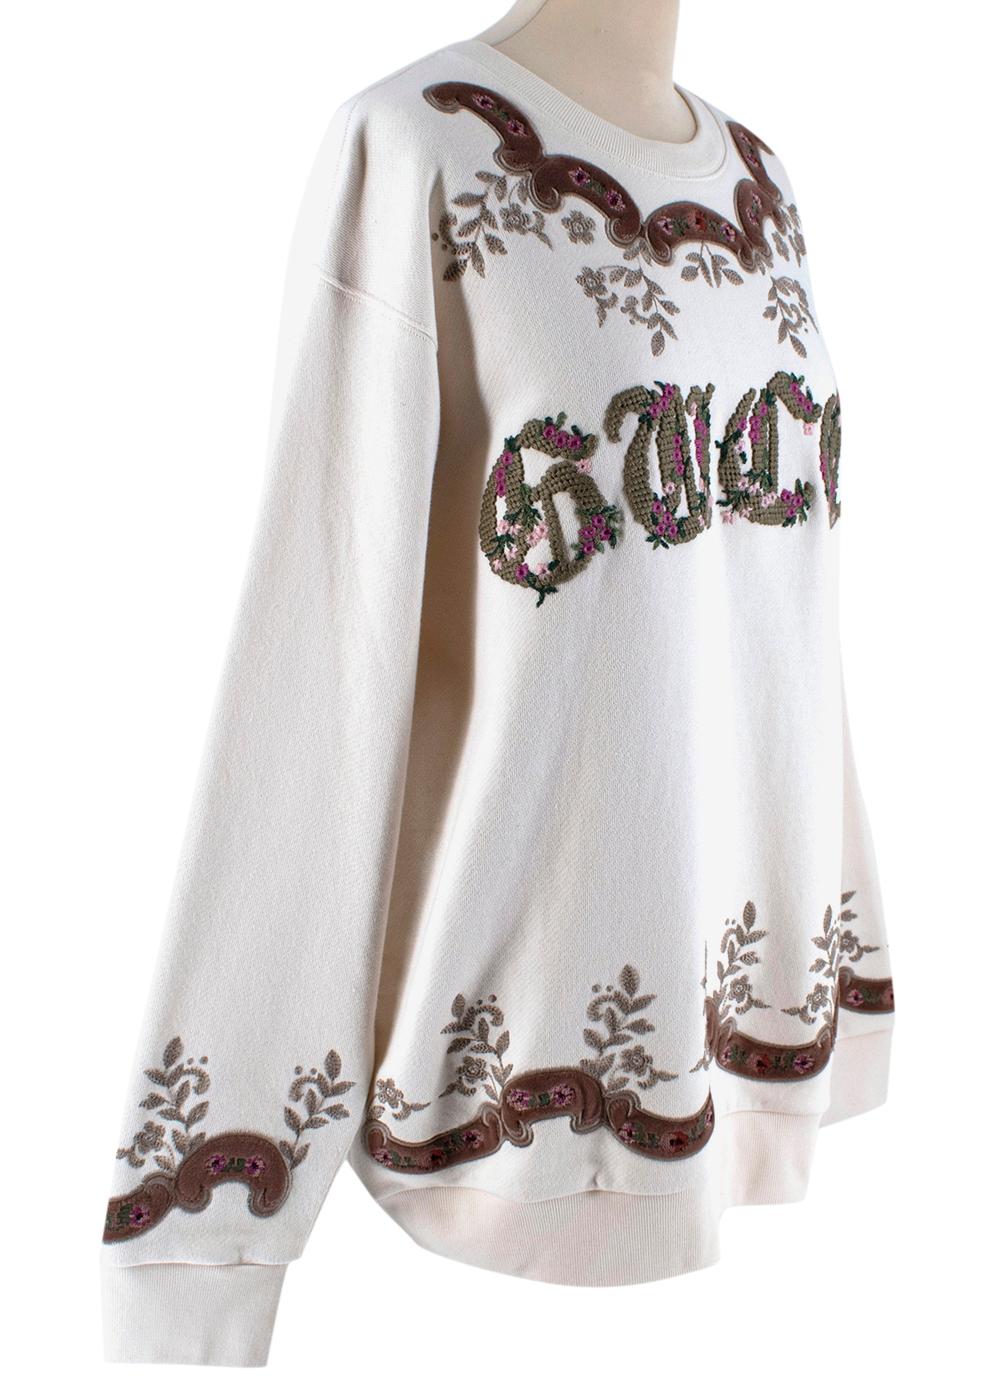 Gucci Ivory Cotton Floral Embroidered Oversized Jumper

-Soft cotton material
-Gucci logo embroidery on front with flower detailing
-Stunning, soft floral embroidery bordering hemlines
-Ribbed hems
-Crewneck style
-Oversized, relaxed fit

Materials: